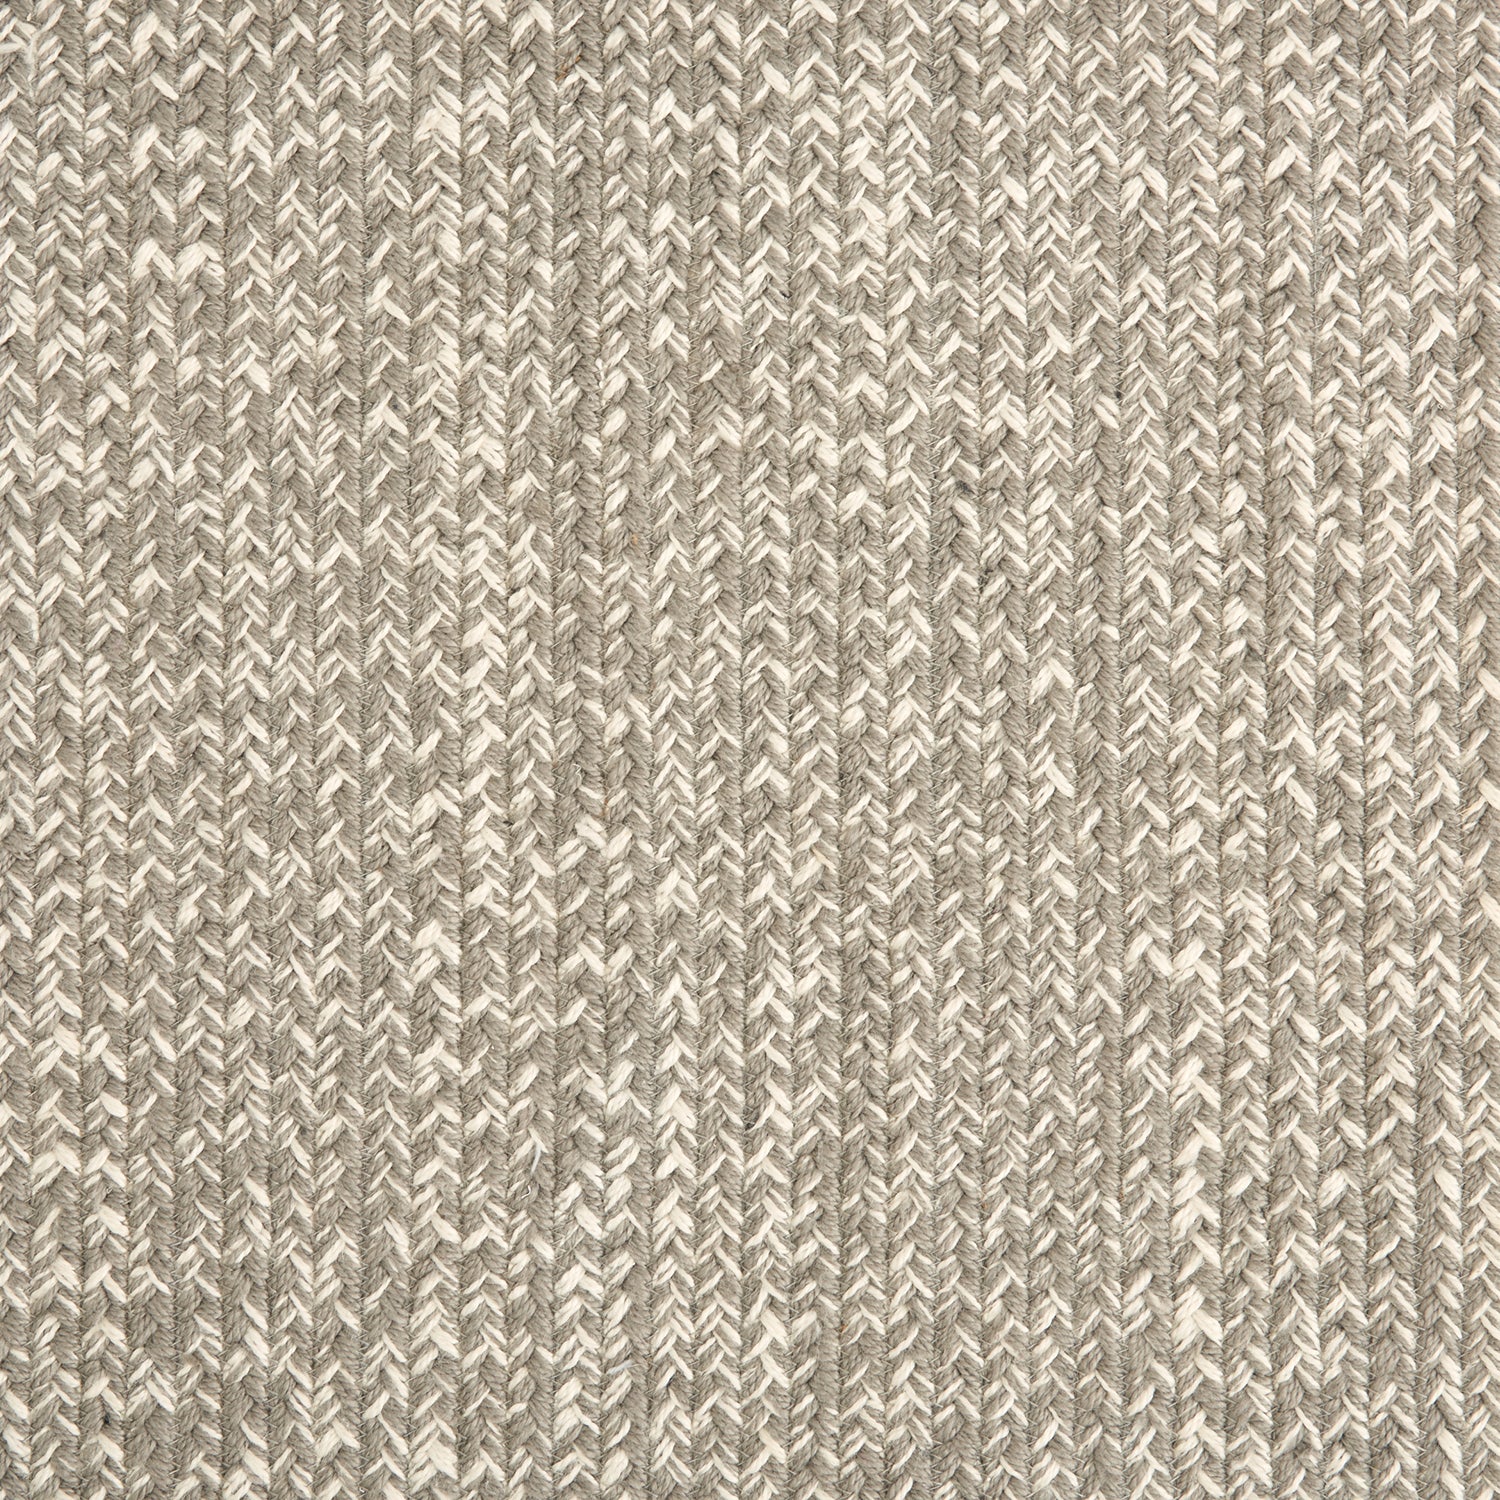 Outdoor broadloom carpet swatch in a chunky ribbed weave in mottled brown and cream.